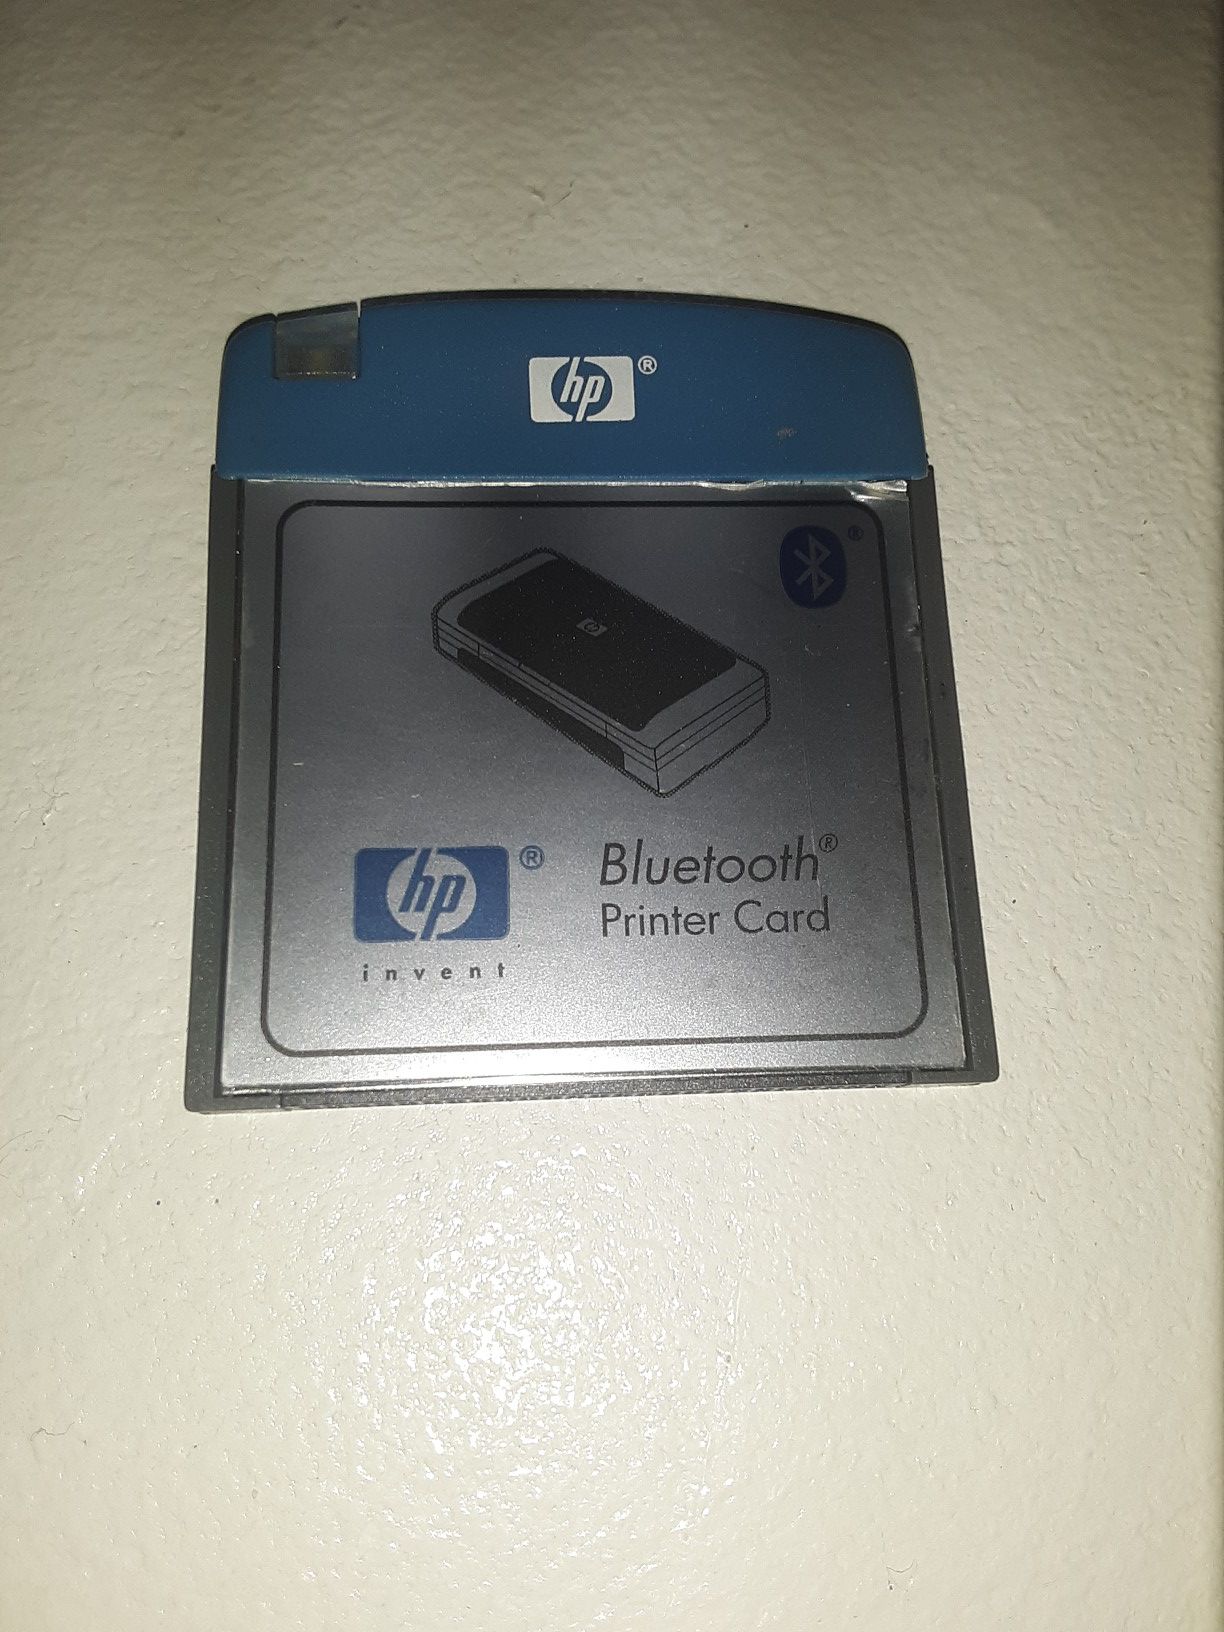 HP BLUTOOTH PRINTER CARD ADAPTER FOR HP PORTABLE PRINTERS